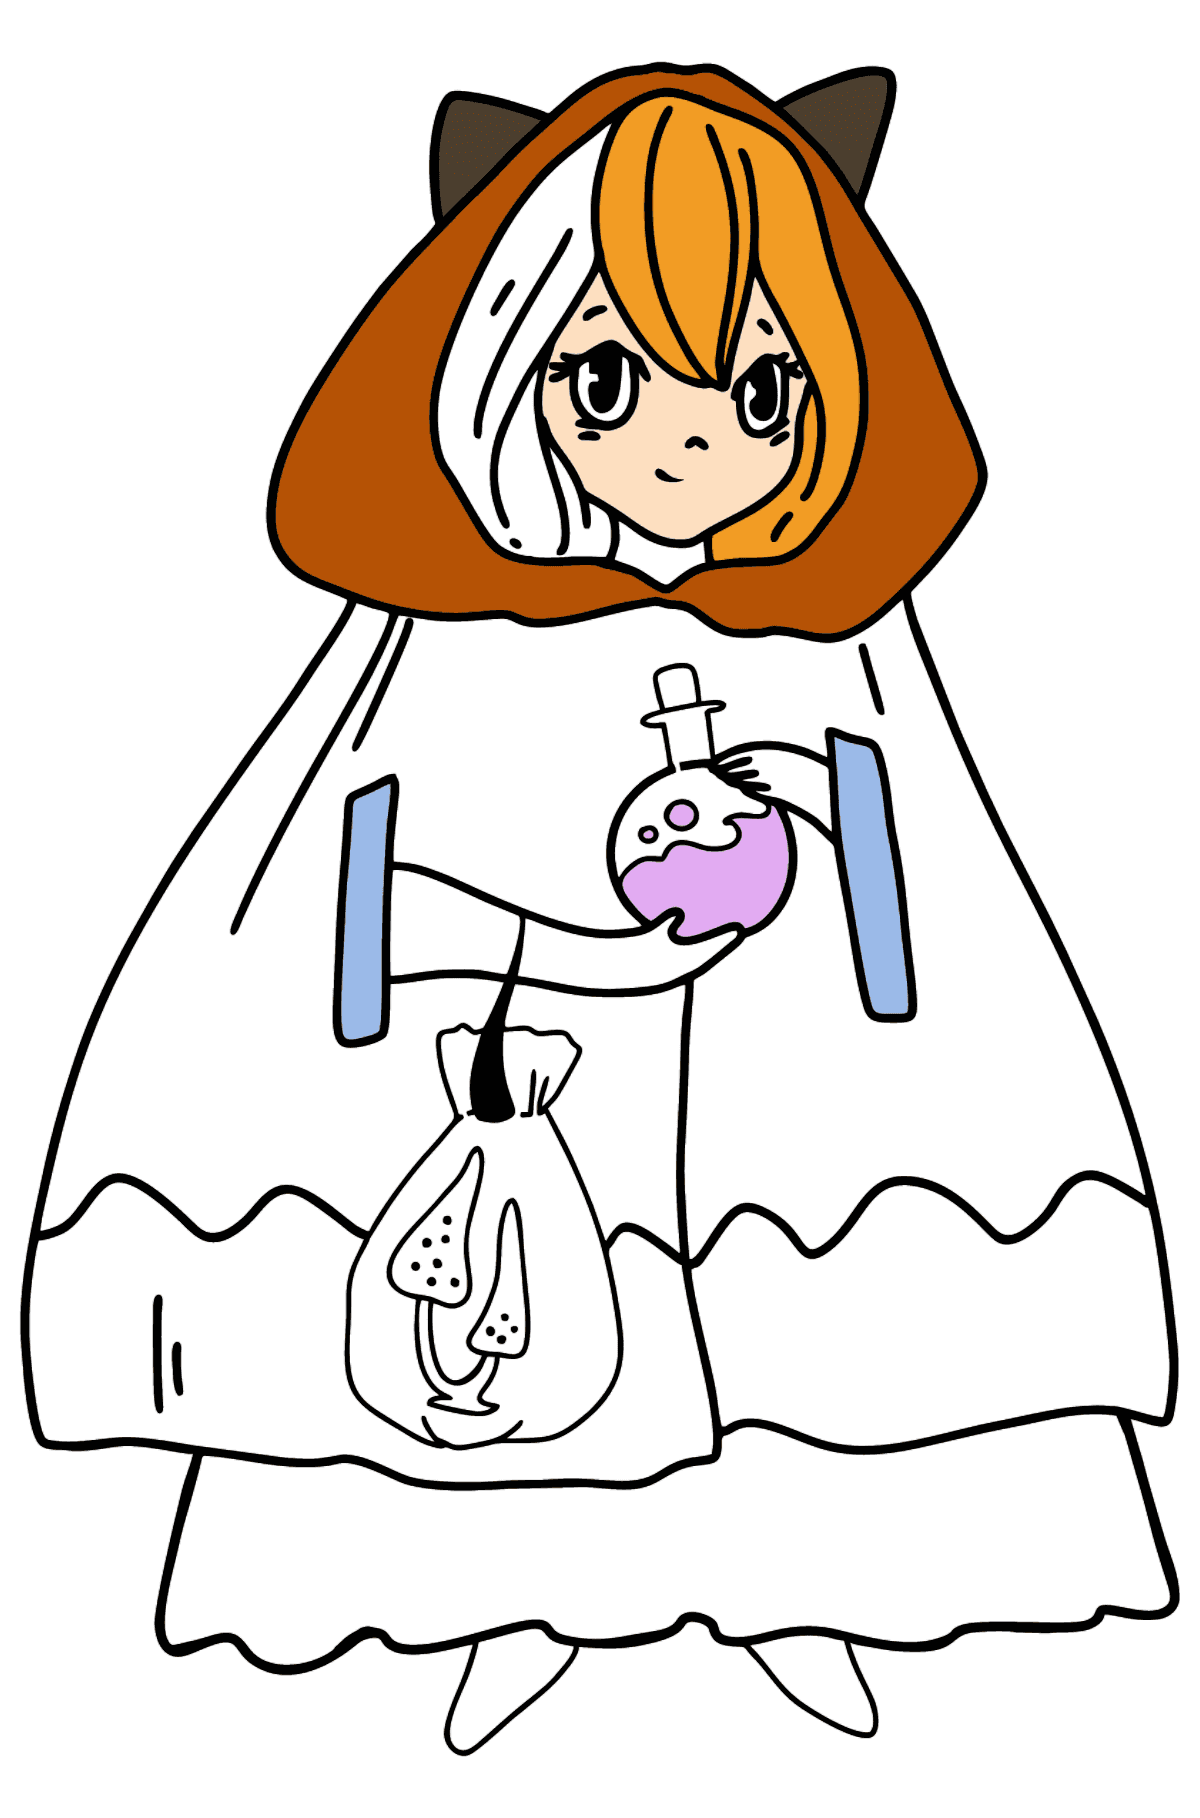 Anime Girl Witch Coloring Pages - Coloring Pages for Kids